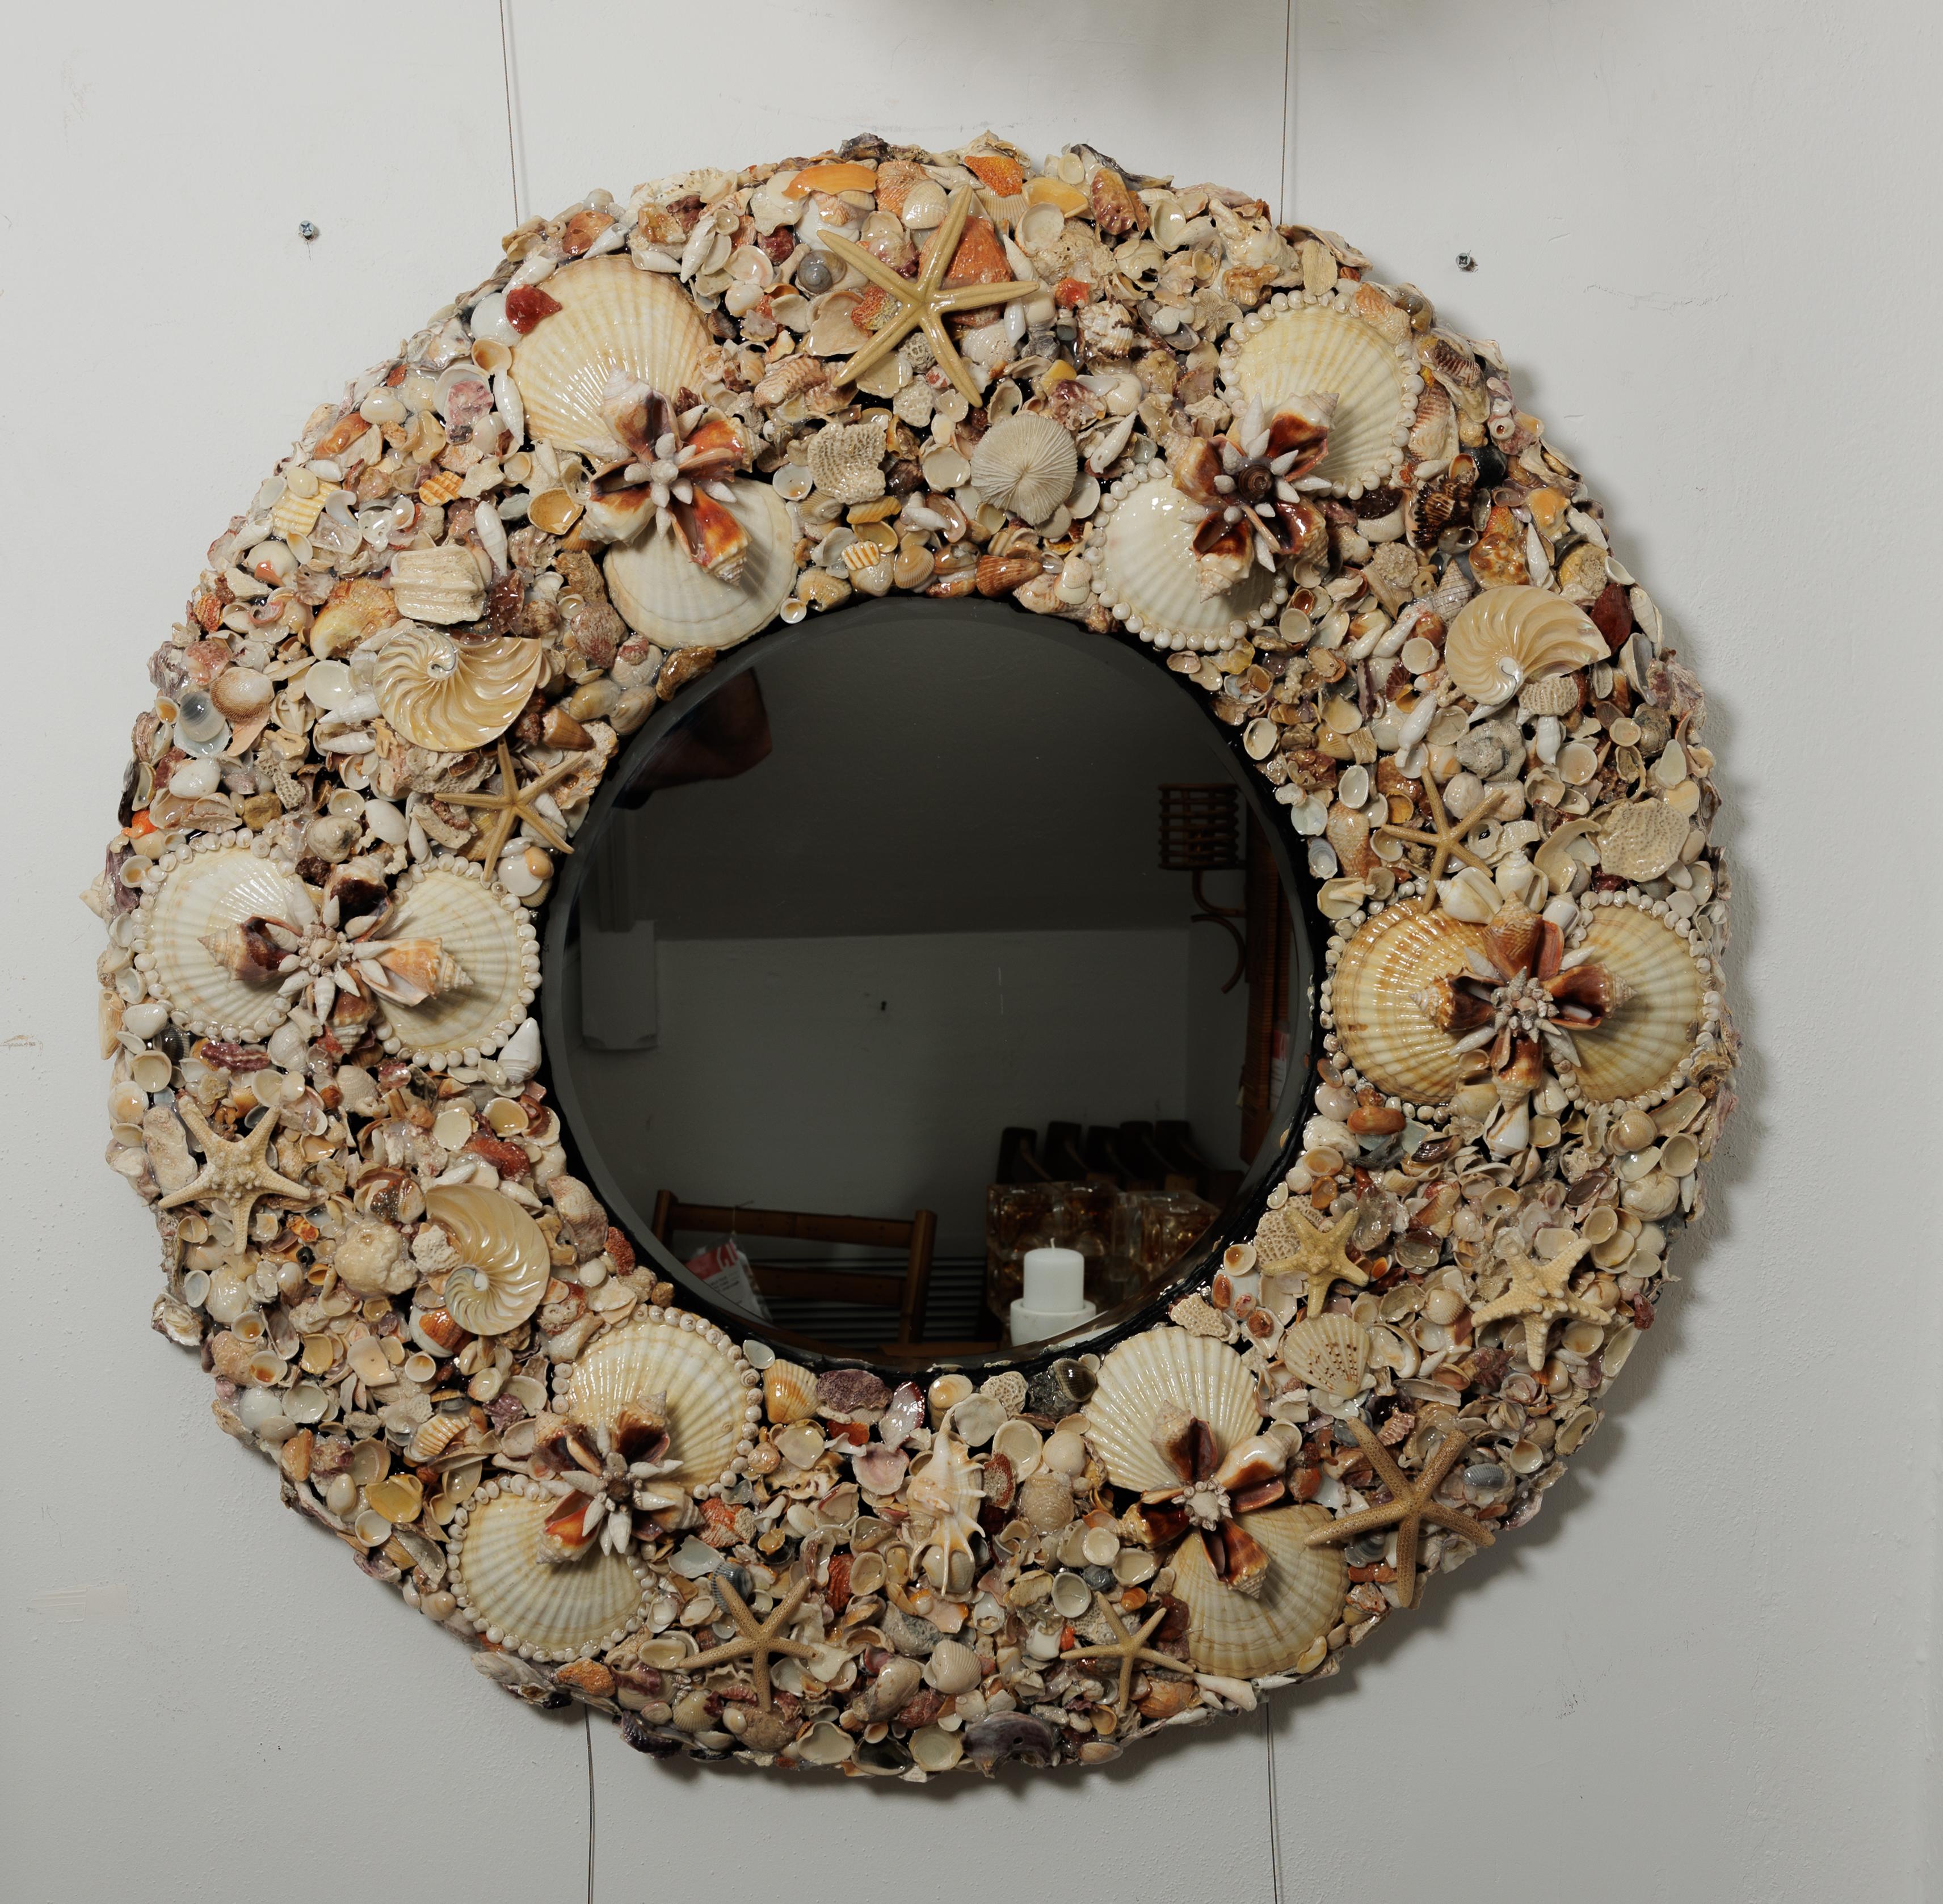 A beautiful round mirror covered in sea shells 